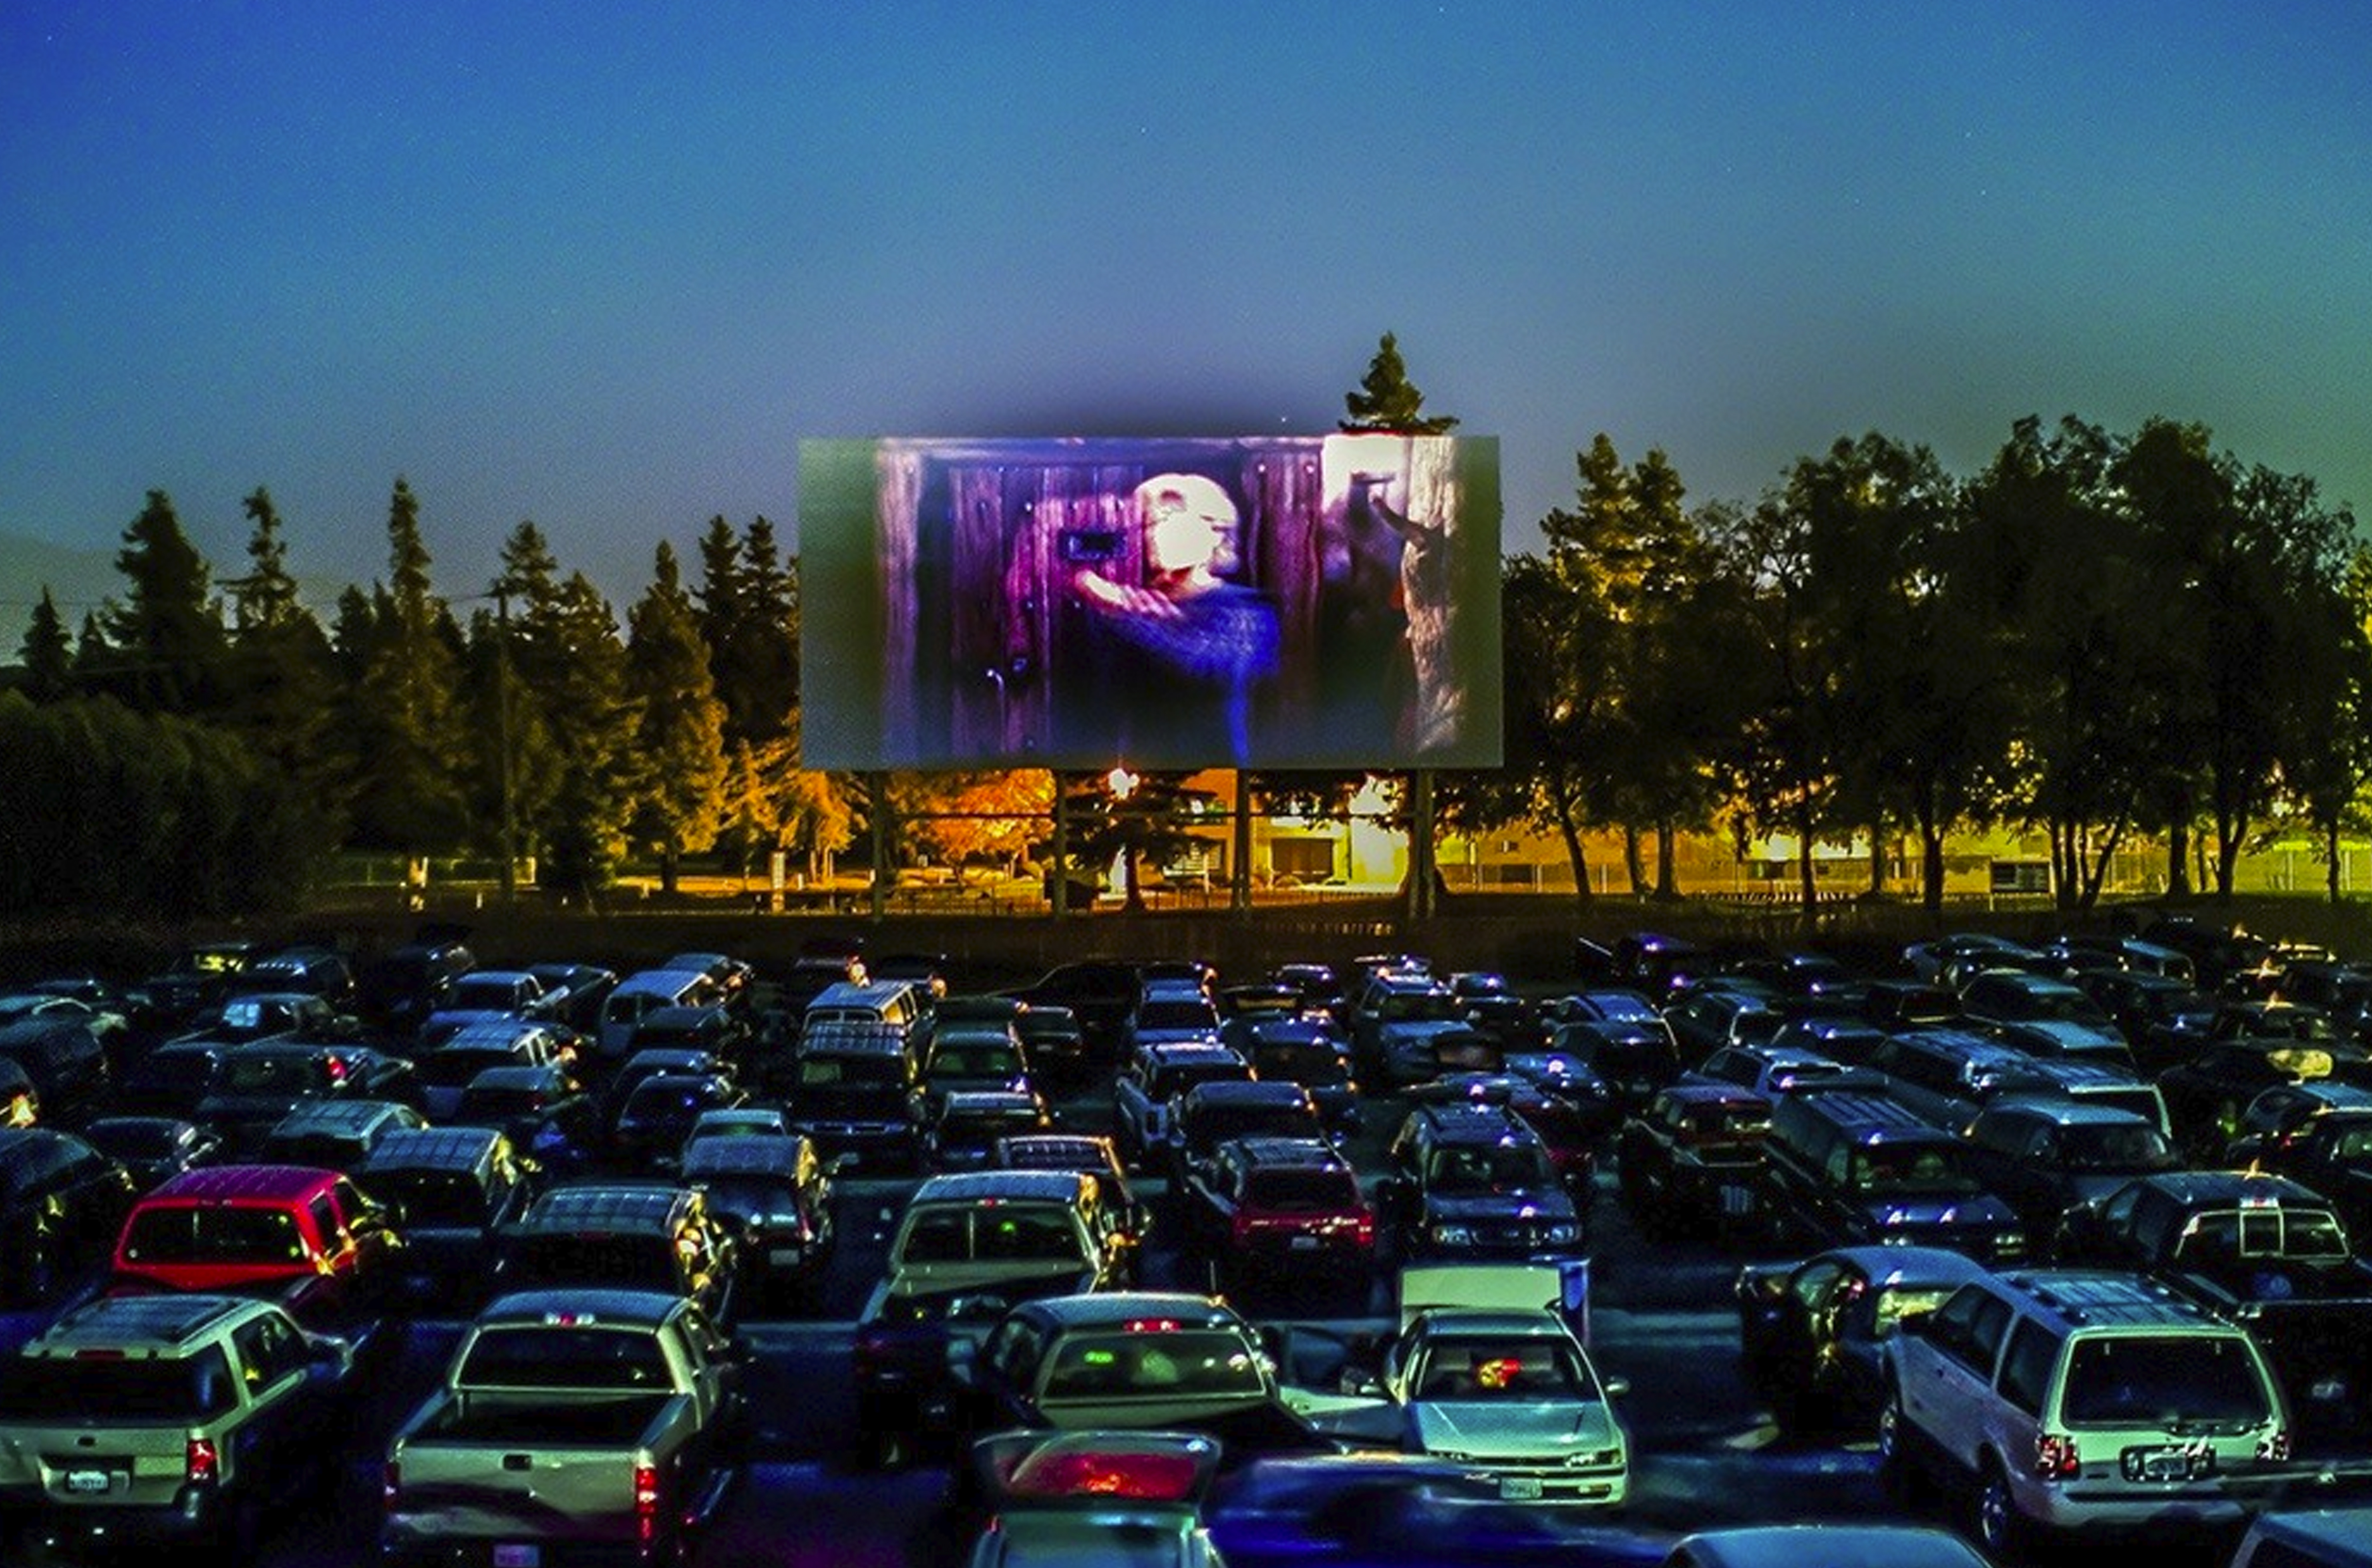 SM MOVIES BY THE BAY: A DRIVE-IN CINEMA IN METRO MANILA